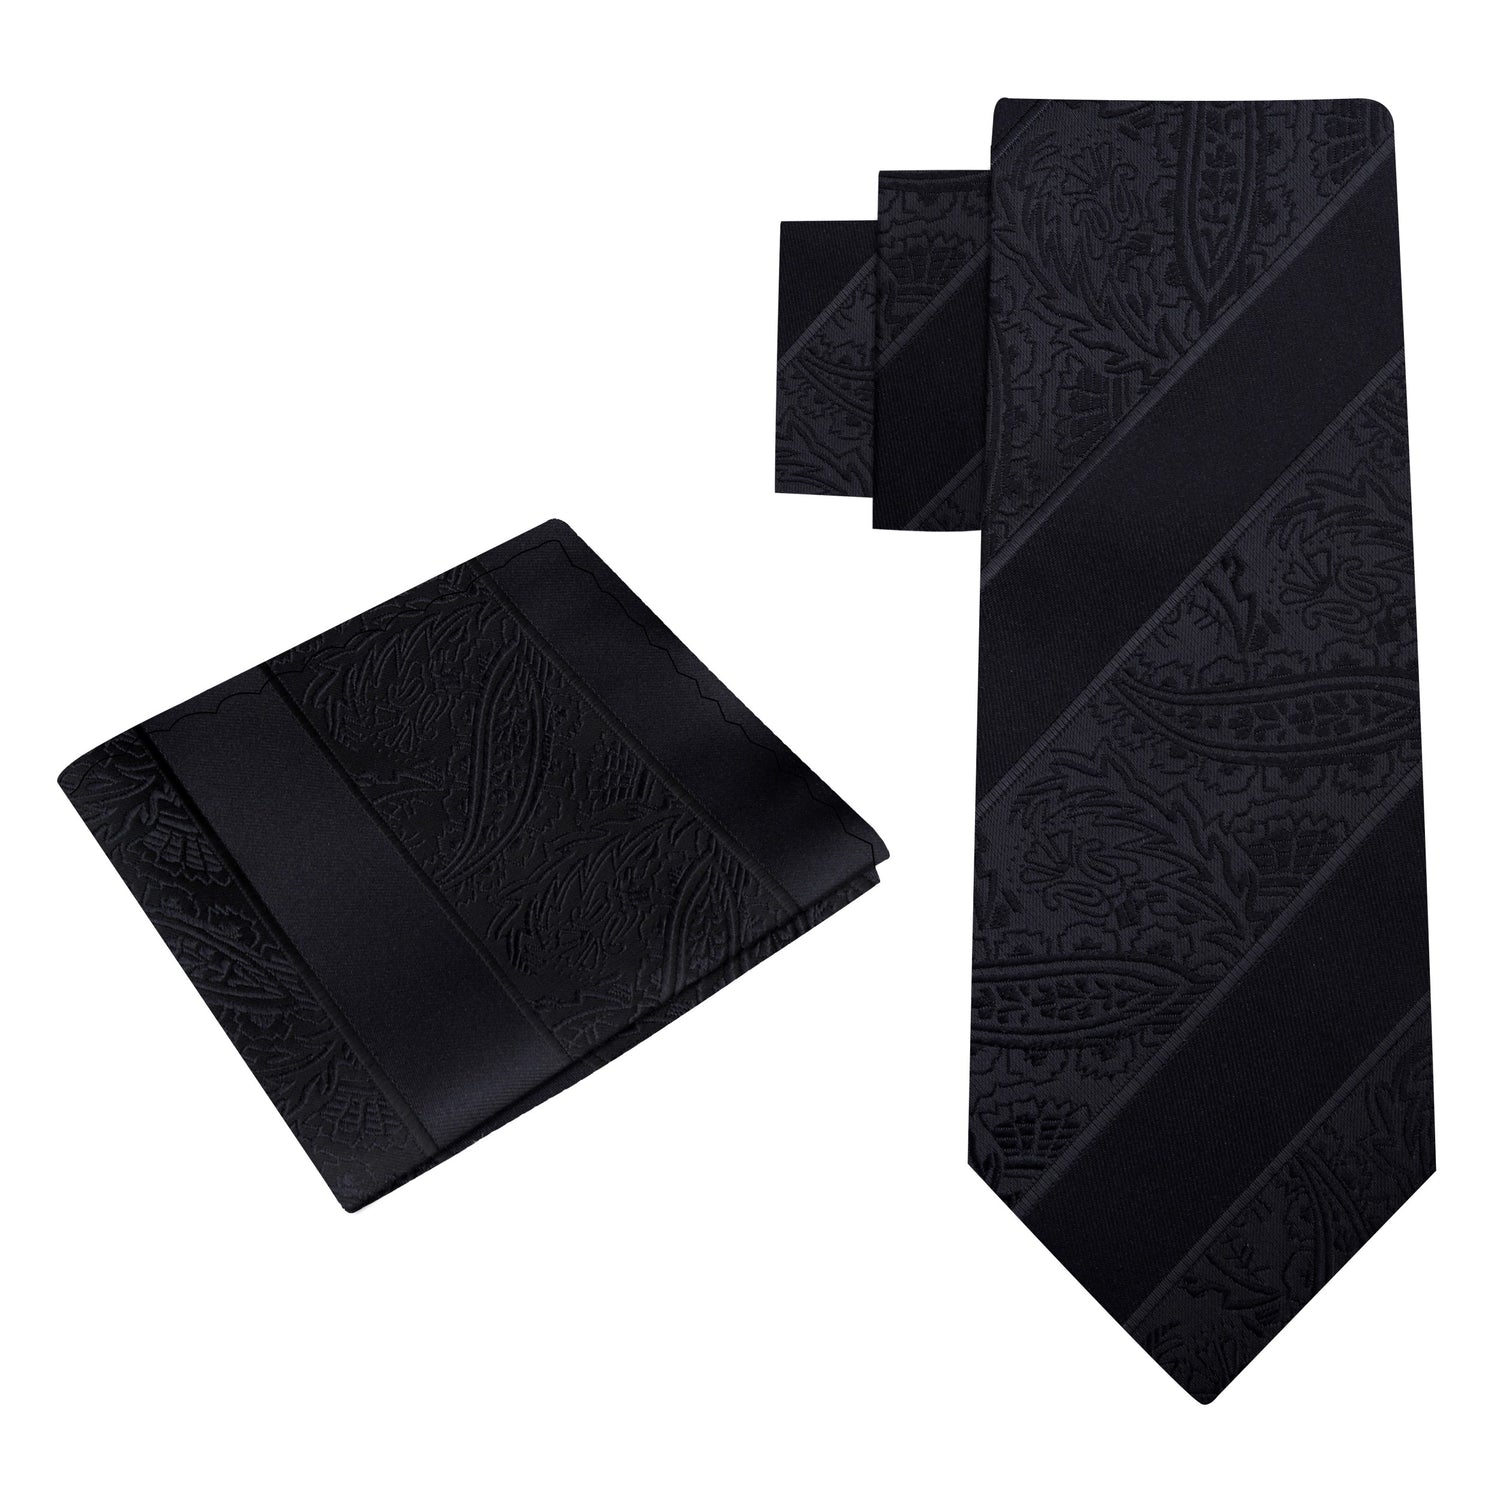 View 2: black paisley tie and square